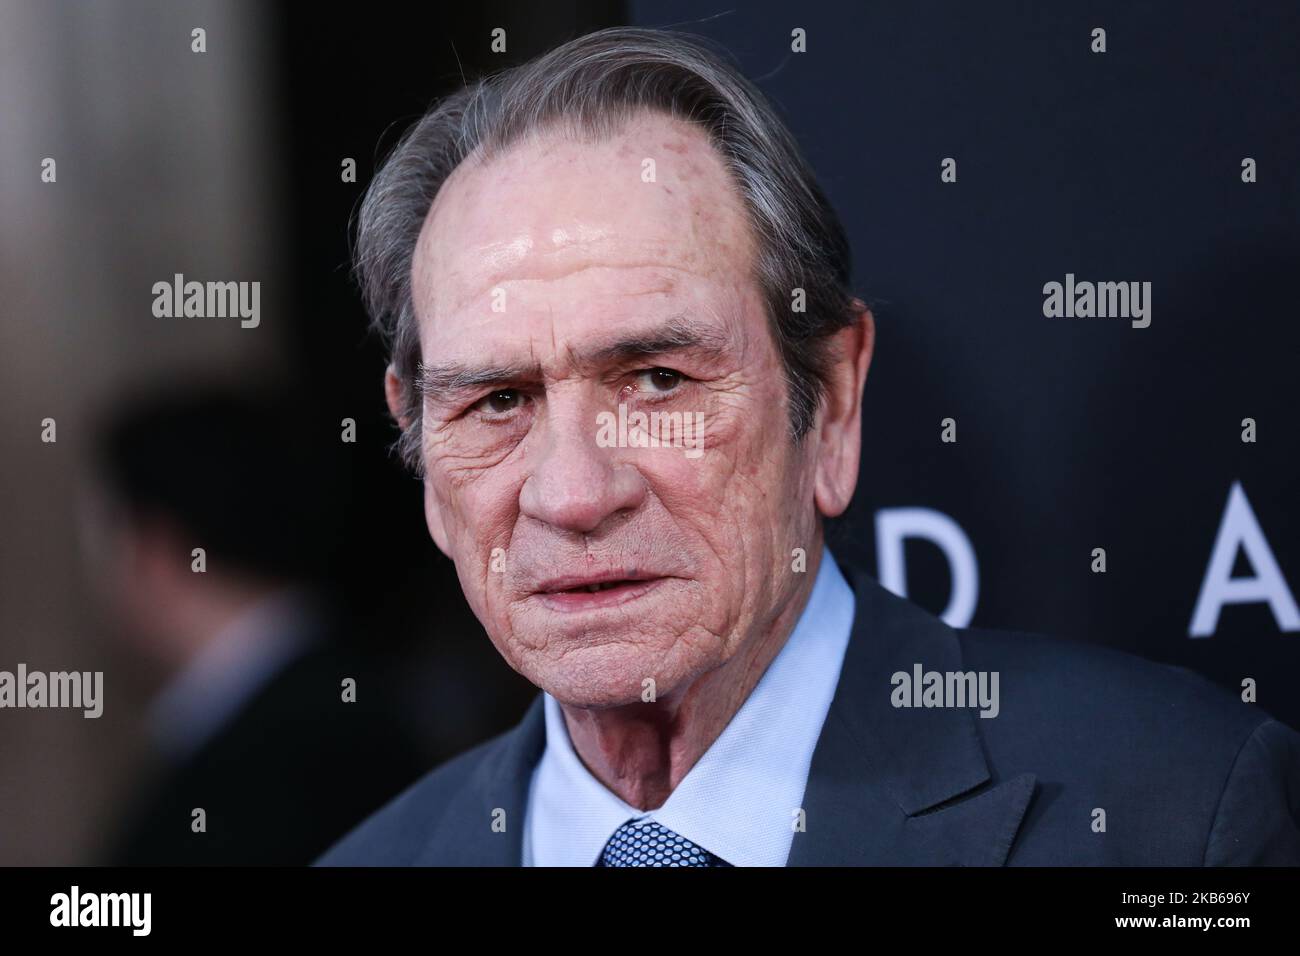 HOLLYWOOD, LOS ANGELES, CALIFORNIA, USA - SEPTEMBER 18: Actor Tommy Lee Jones arrives at the Los Angeles Premiere Of 20th Century Fox's 'Ad Astra' held at ArcLight Cinemas Hollywood Cinerama Dome on August 18, 2019 in Hollywood, Los Angeles, California, United States. (Photo by Xavier Collin/Image Press Agency/NurPhoto) Stock Photo